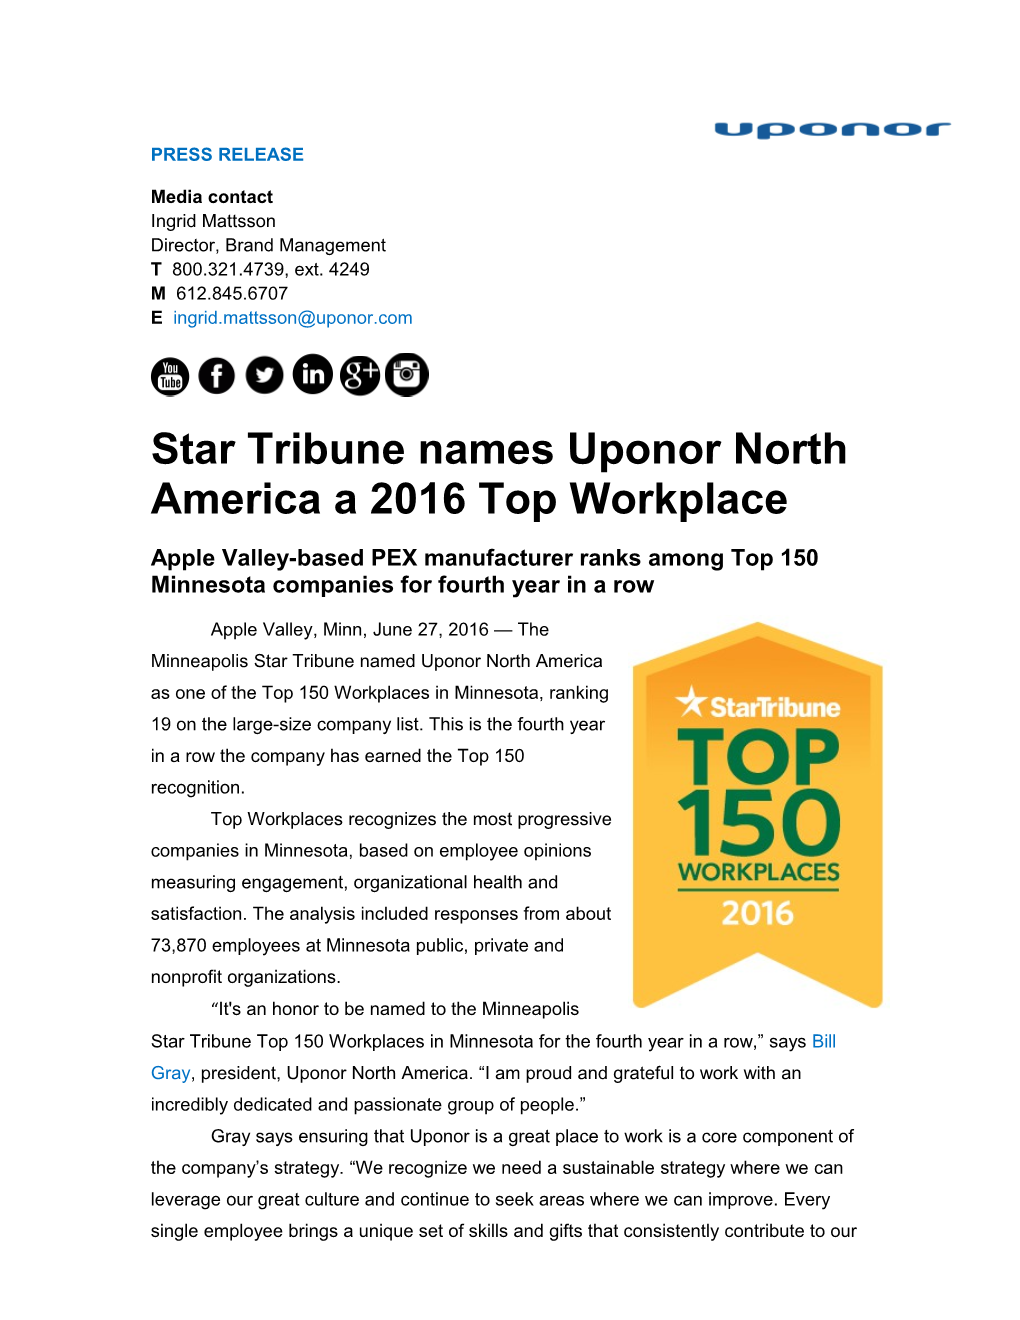 Star Tribune Names Uponor North America a 2016 Top Workplace